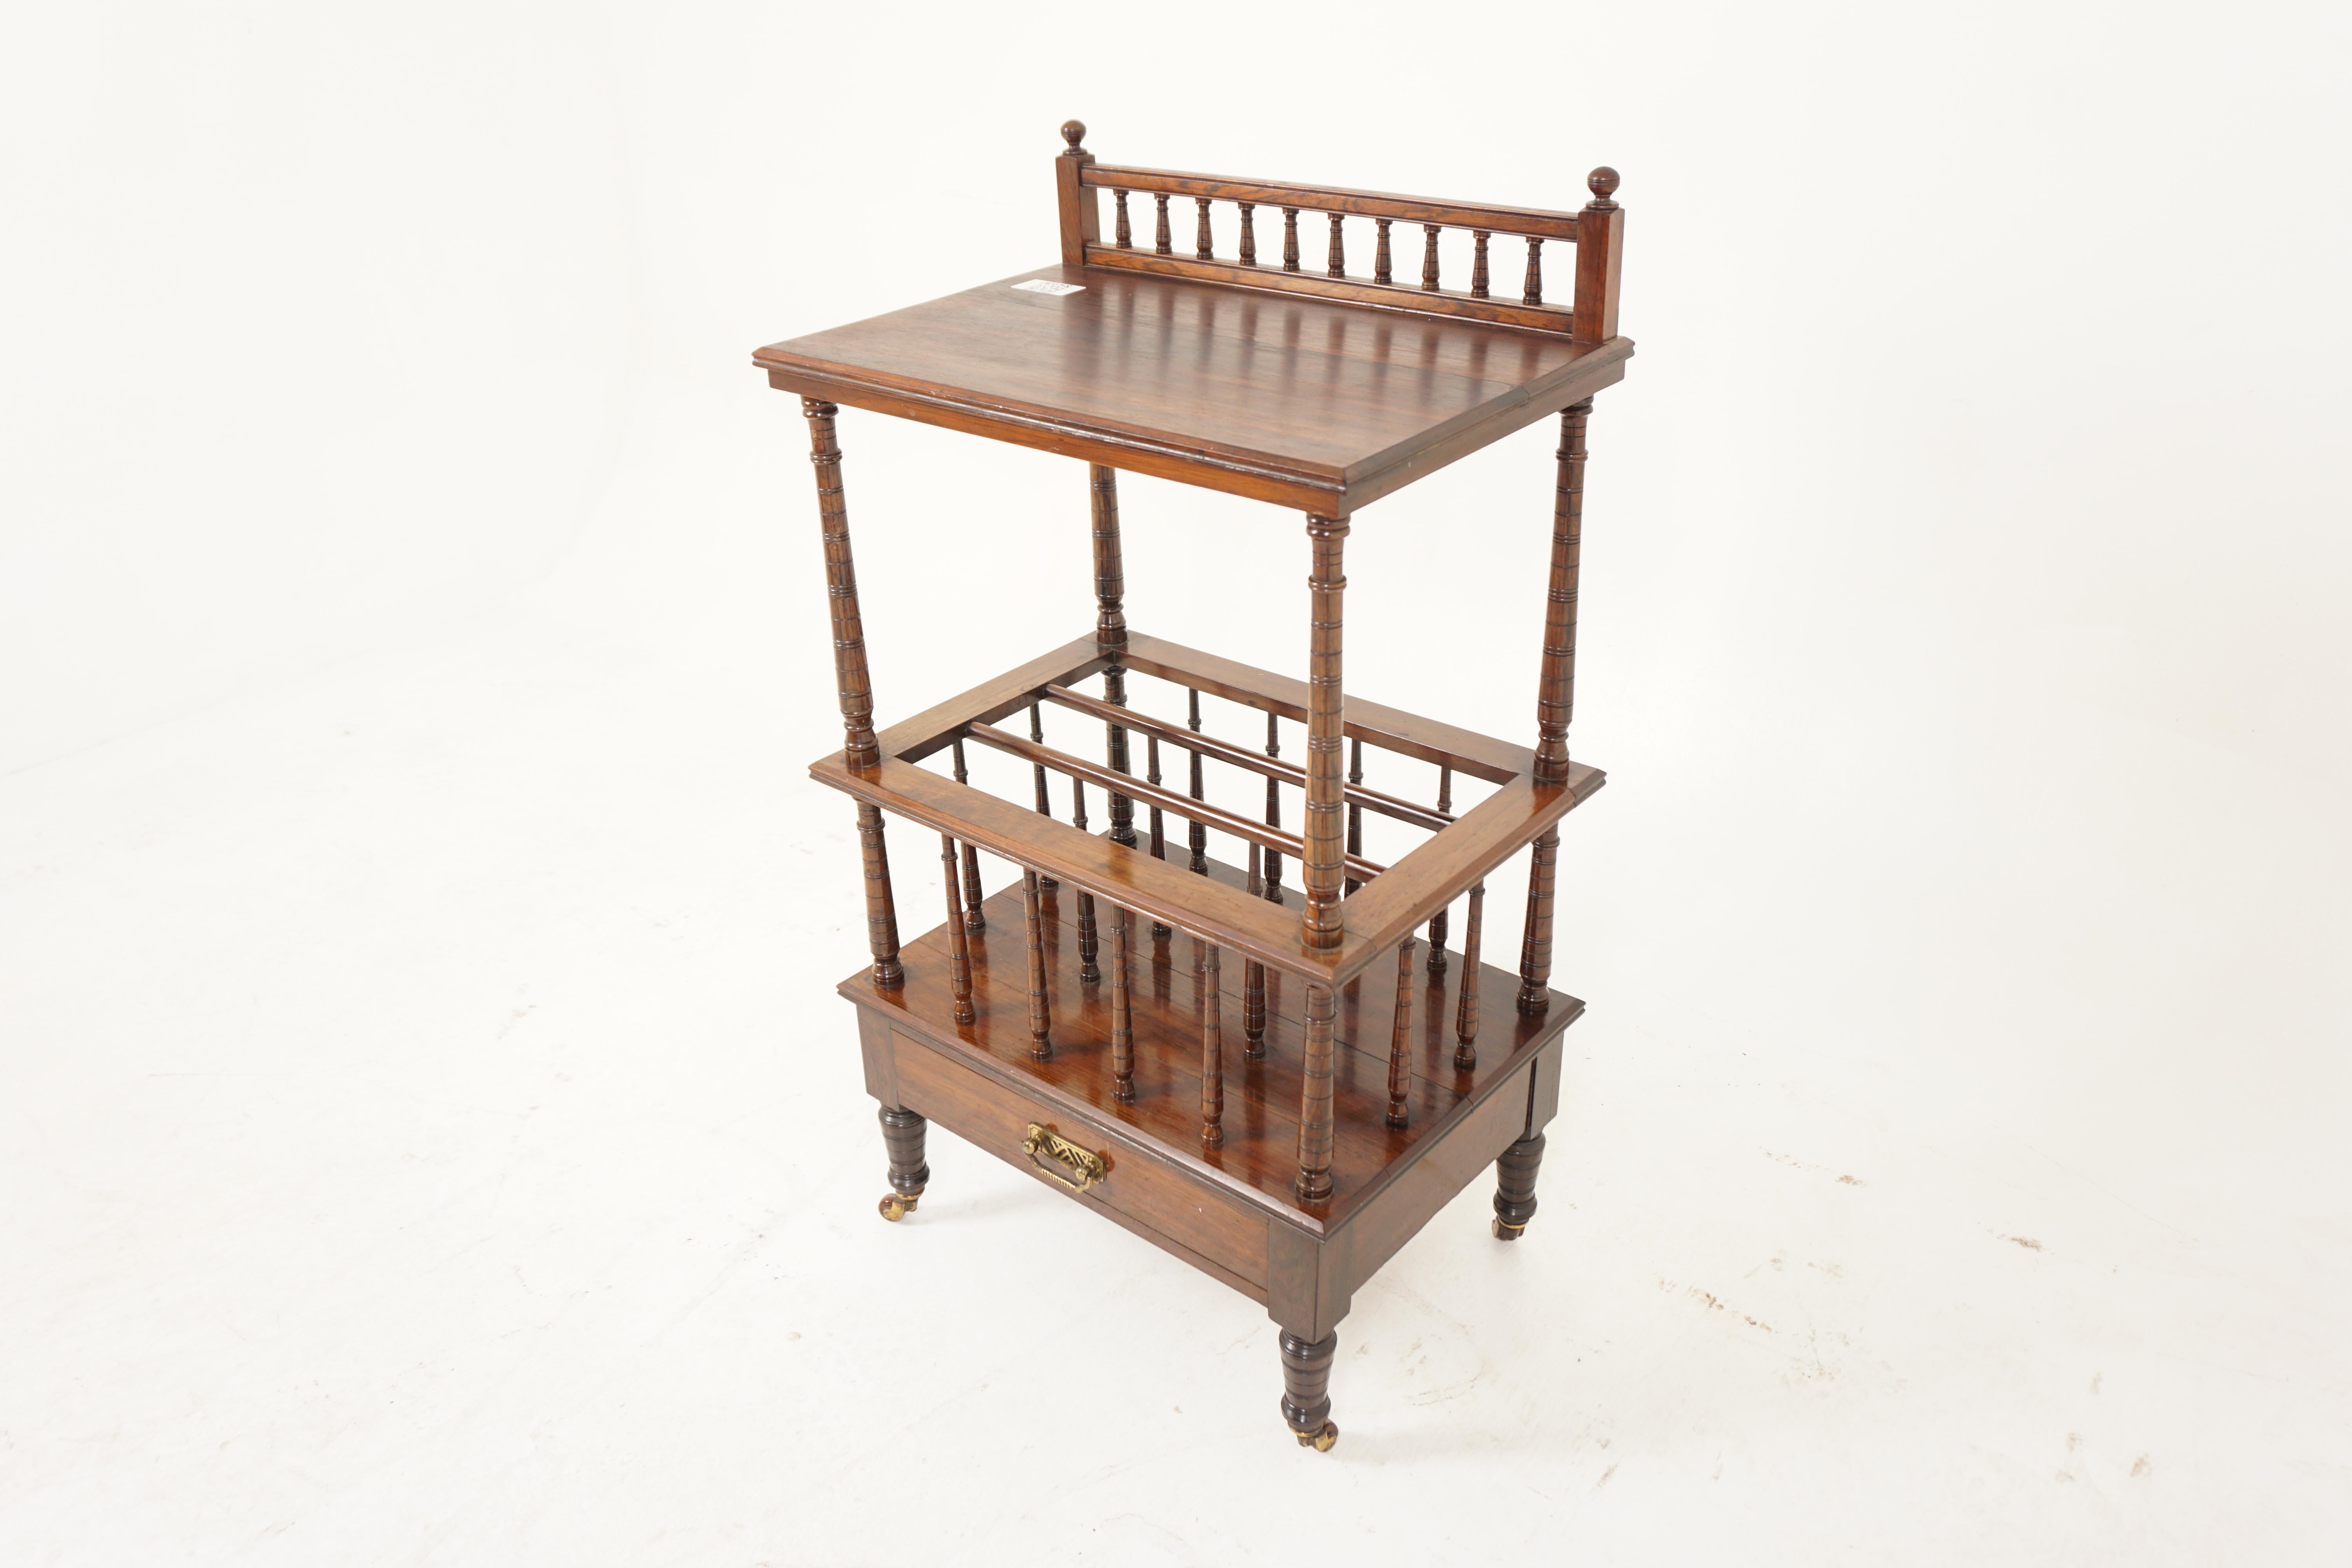 Antique Victorian Walnut Canterbury, What Not Paper Rack, Scotland 1870, H971

Scotland 1870
Solid and Veneer
Original Finish
Open Gallery on rectangular moulded top
Above three divisions divided and enclosed by spindles
There are turned